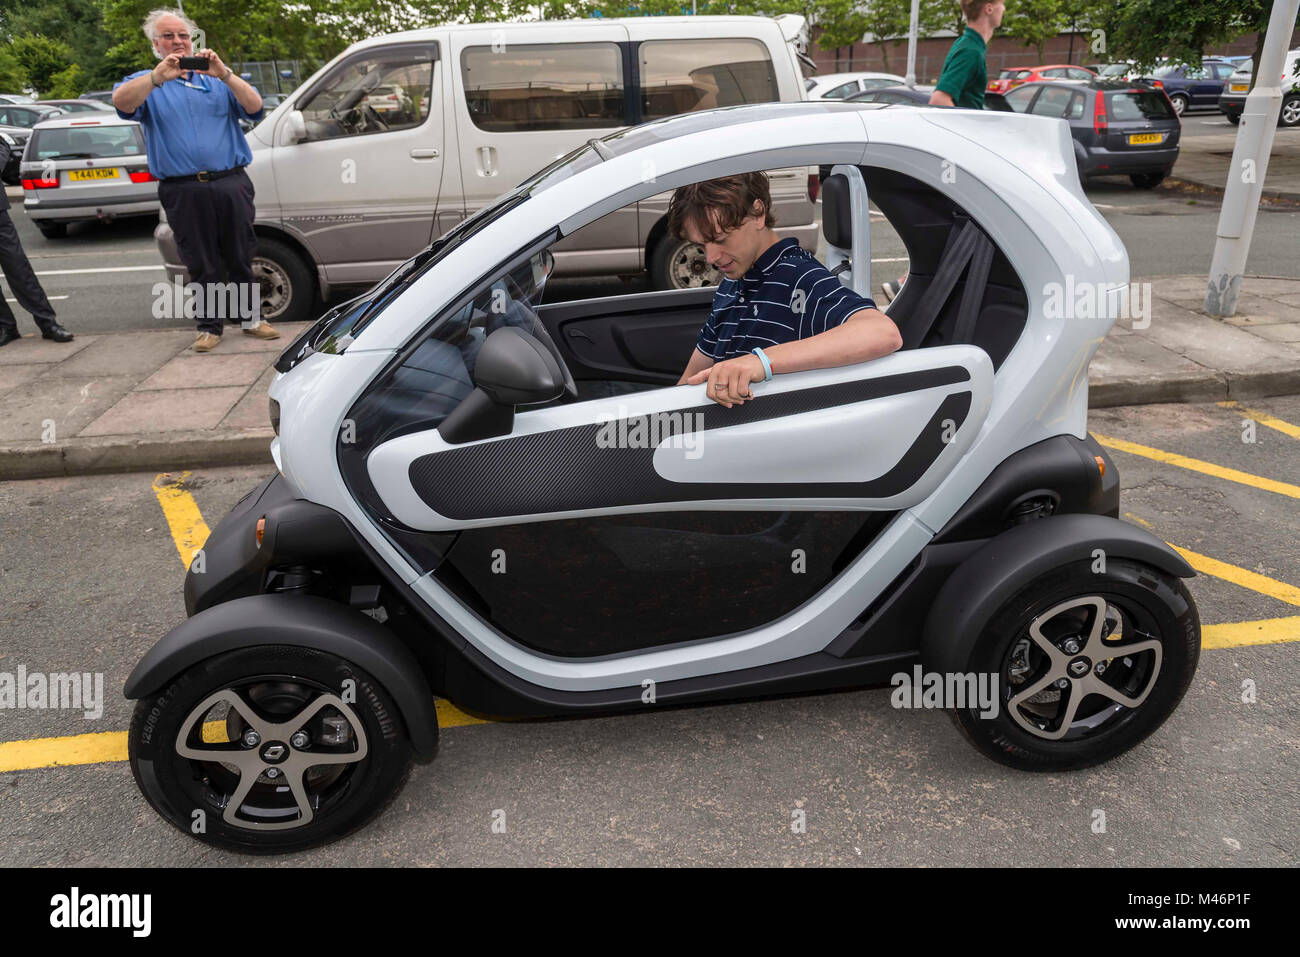 A one person Renault electric car Stock Photo Alamy